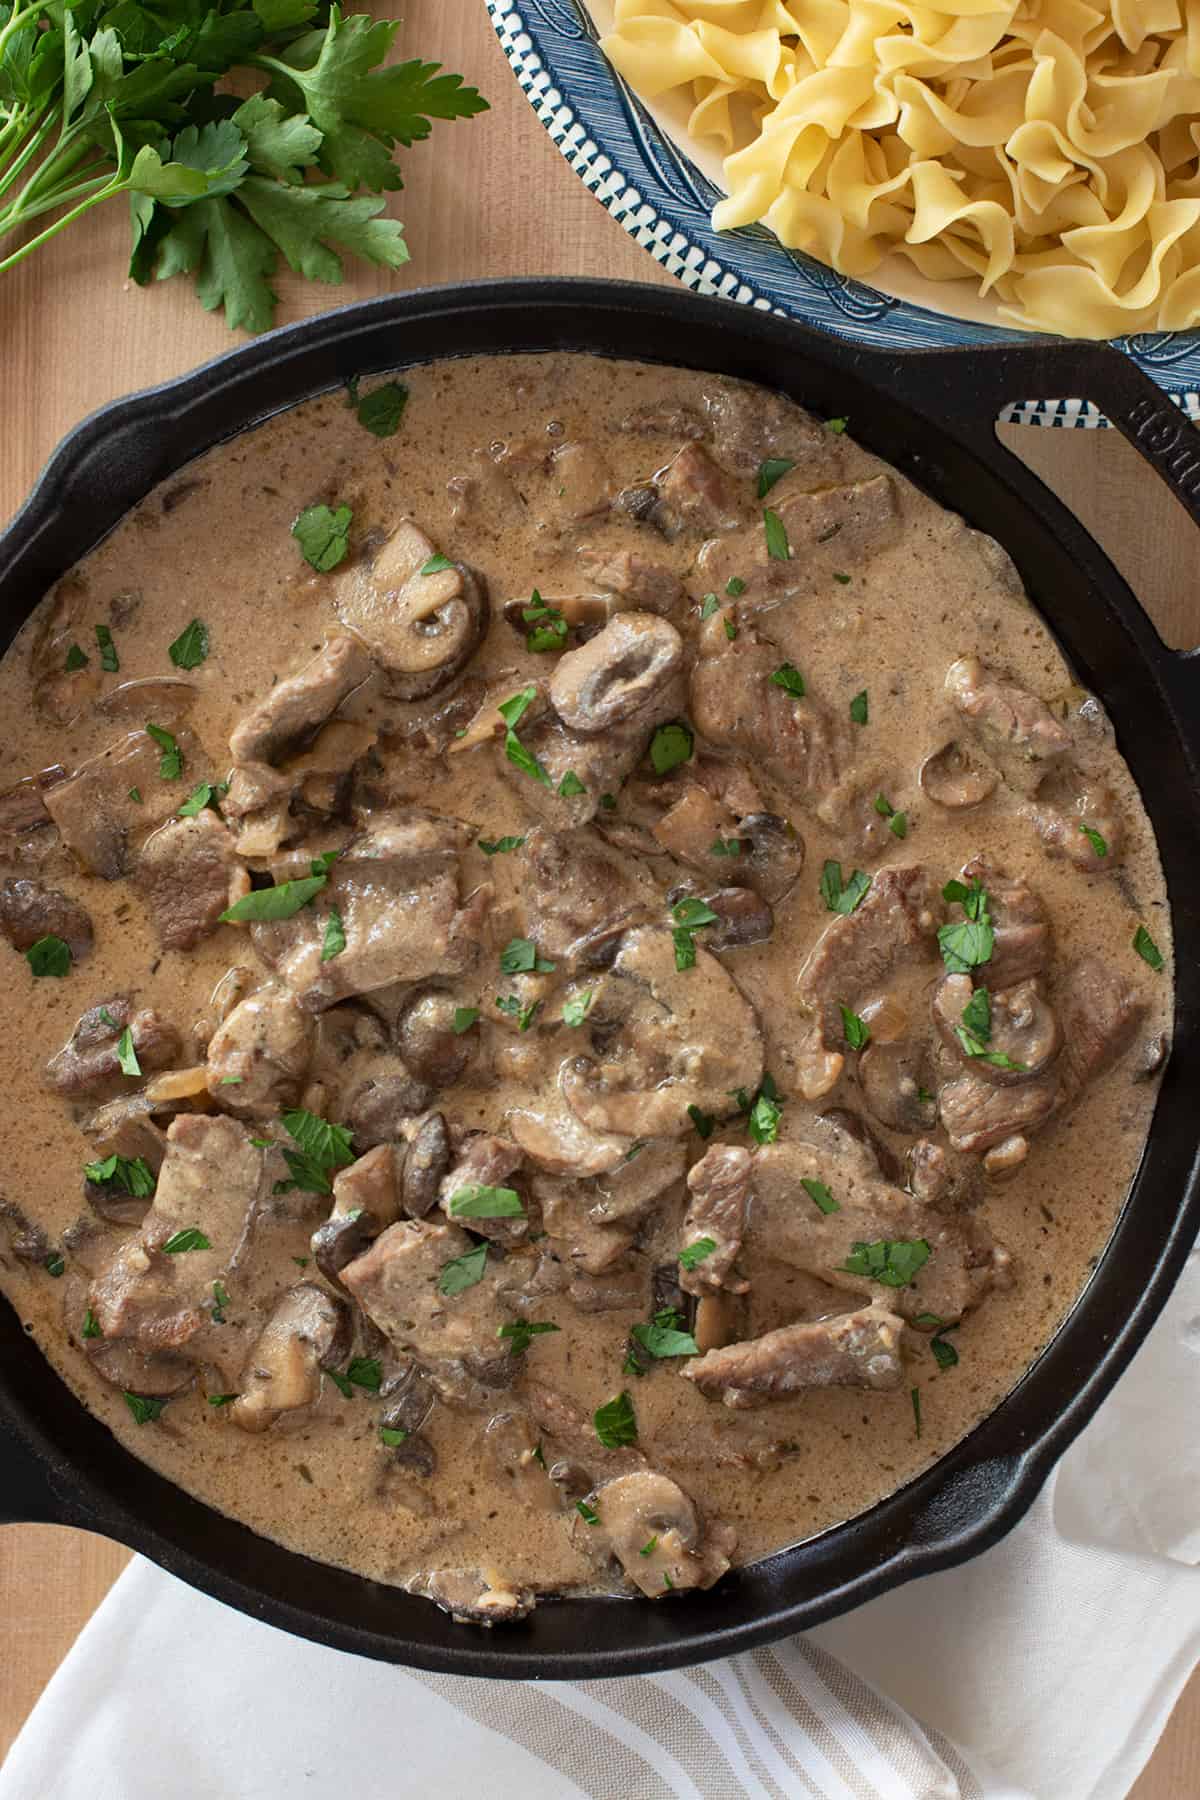 Beef and Mushroom Gravy in a cast iron pan to show color and texture.